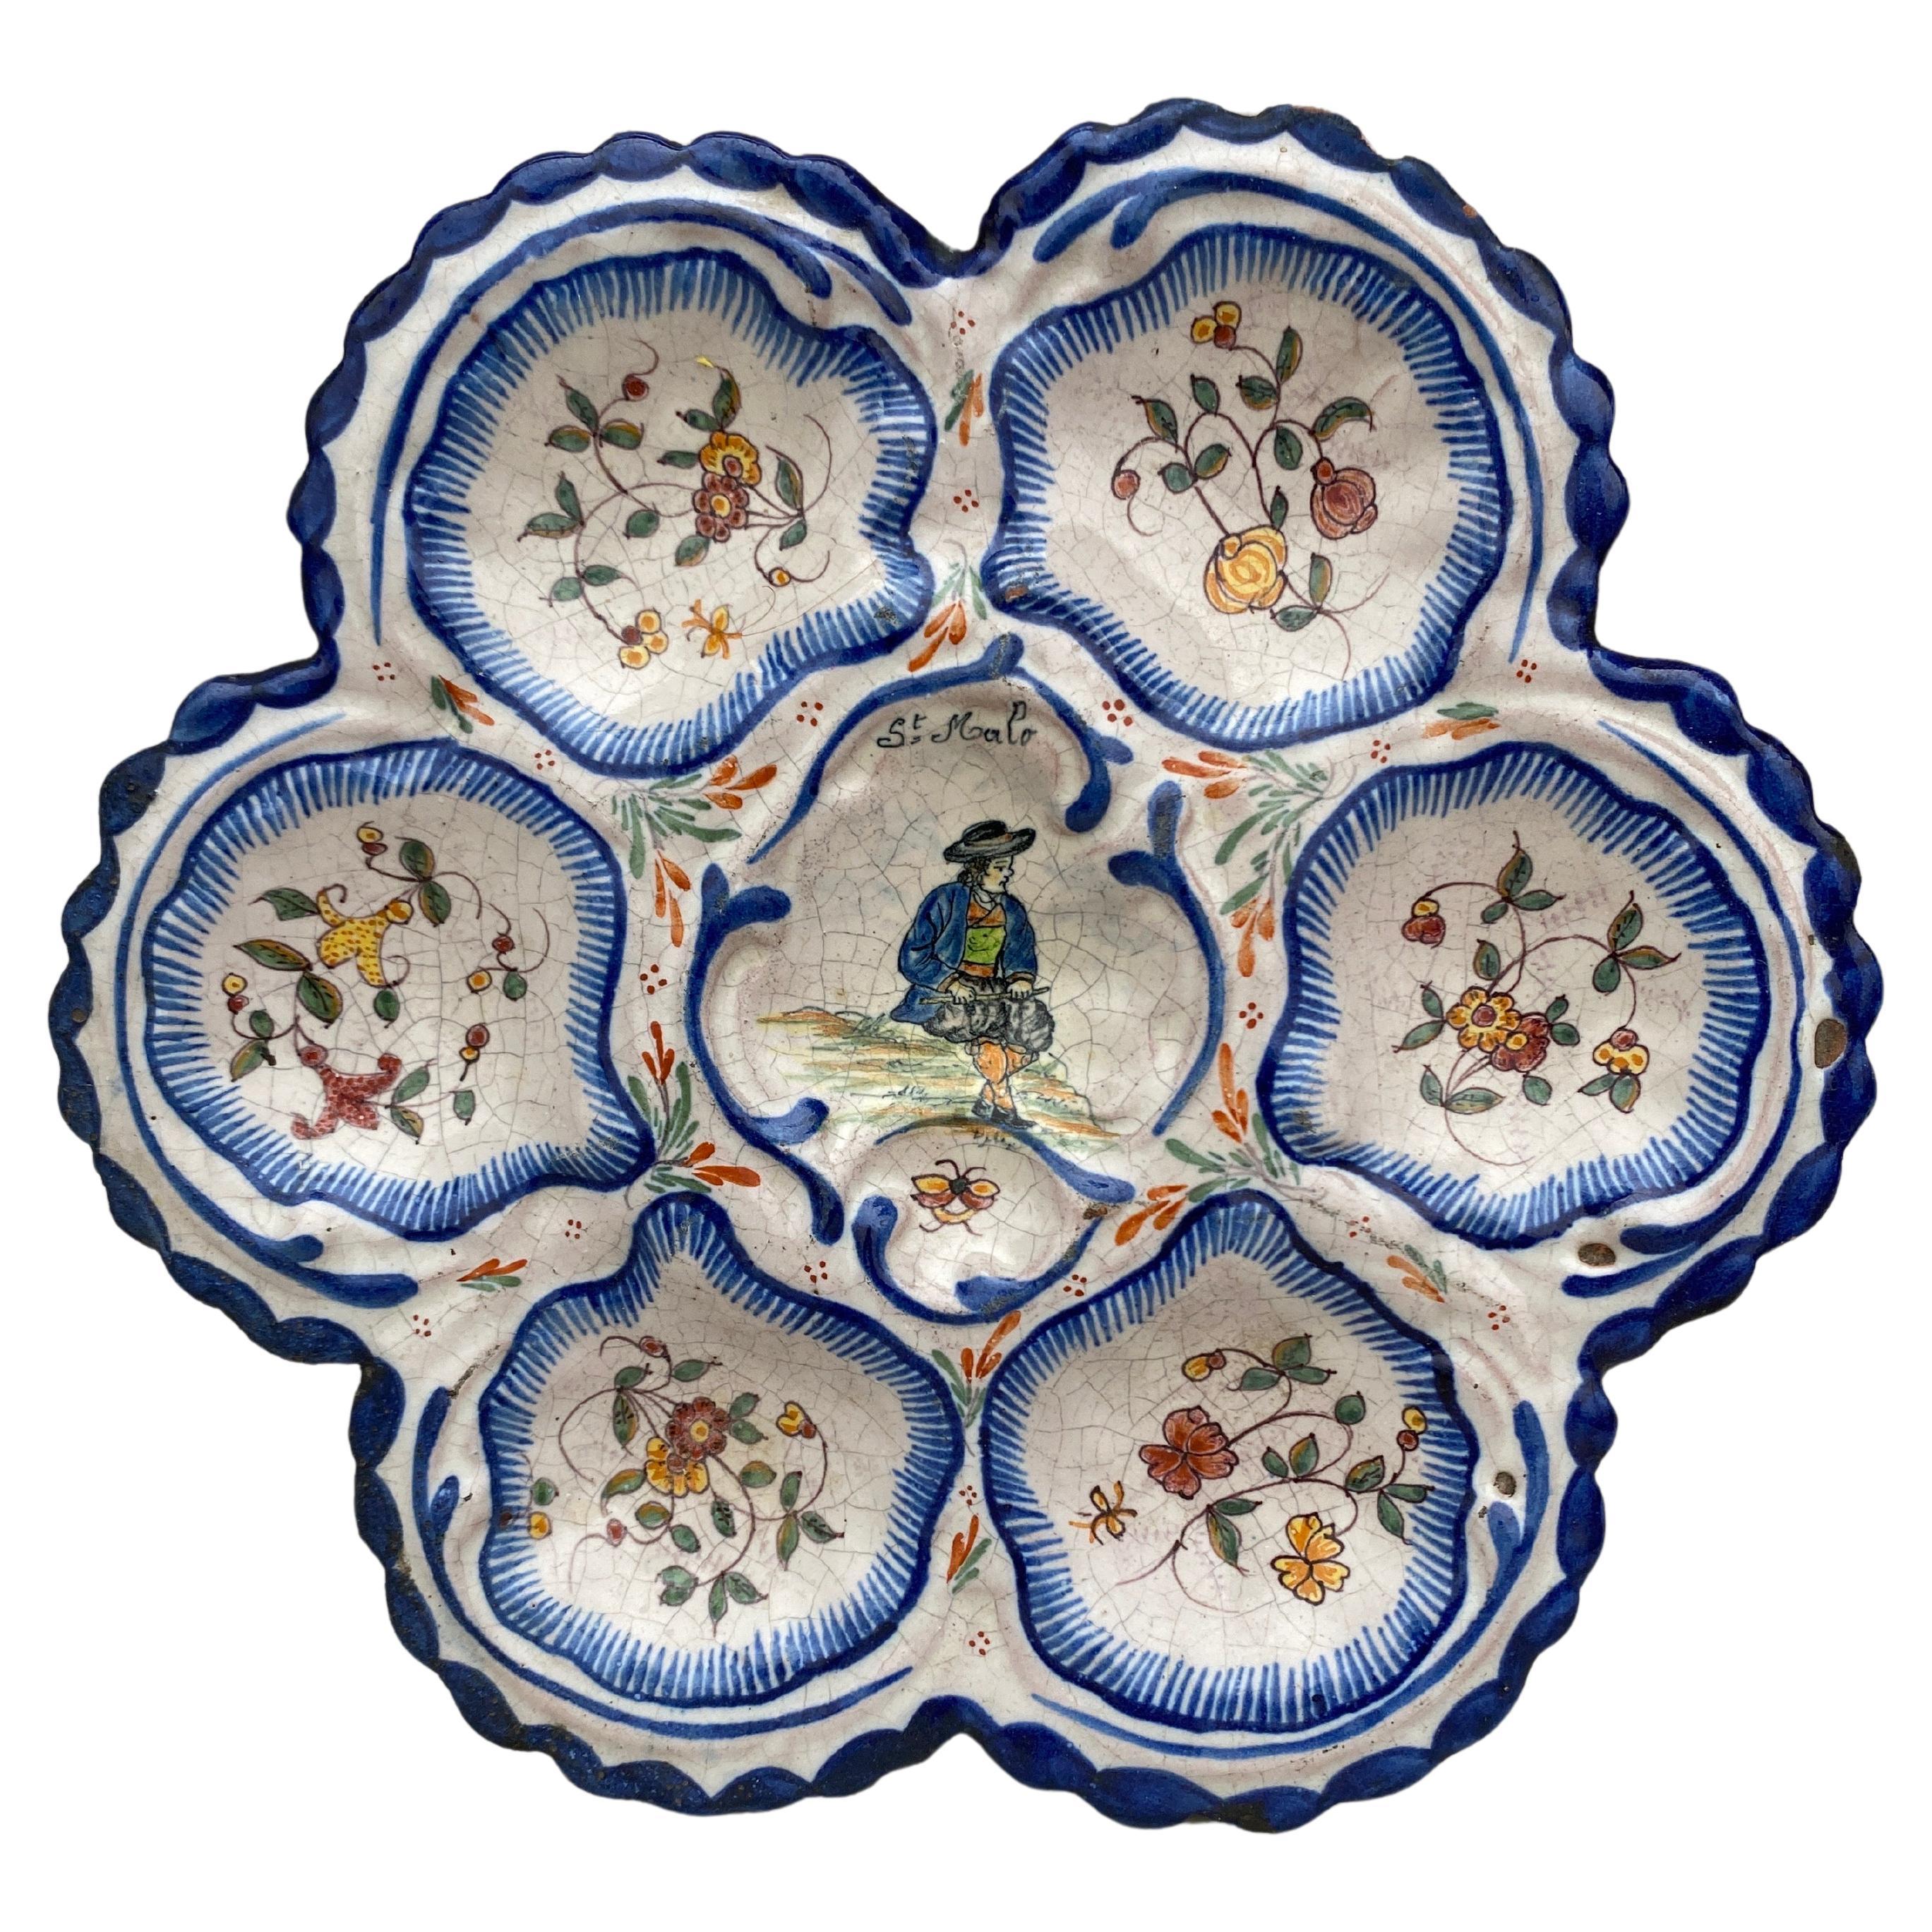 19th Century French Faience Breton Oyster Plate Malicorne